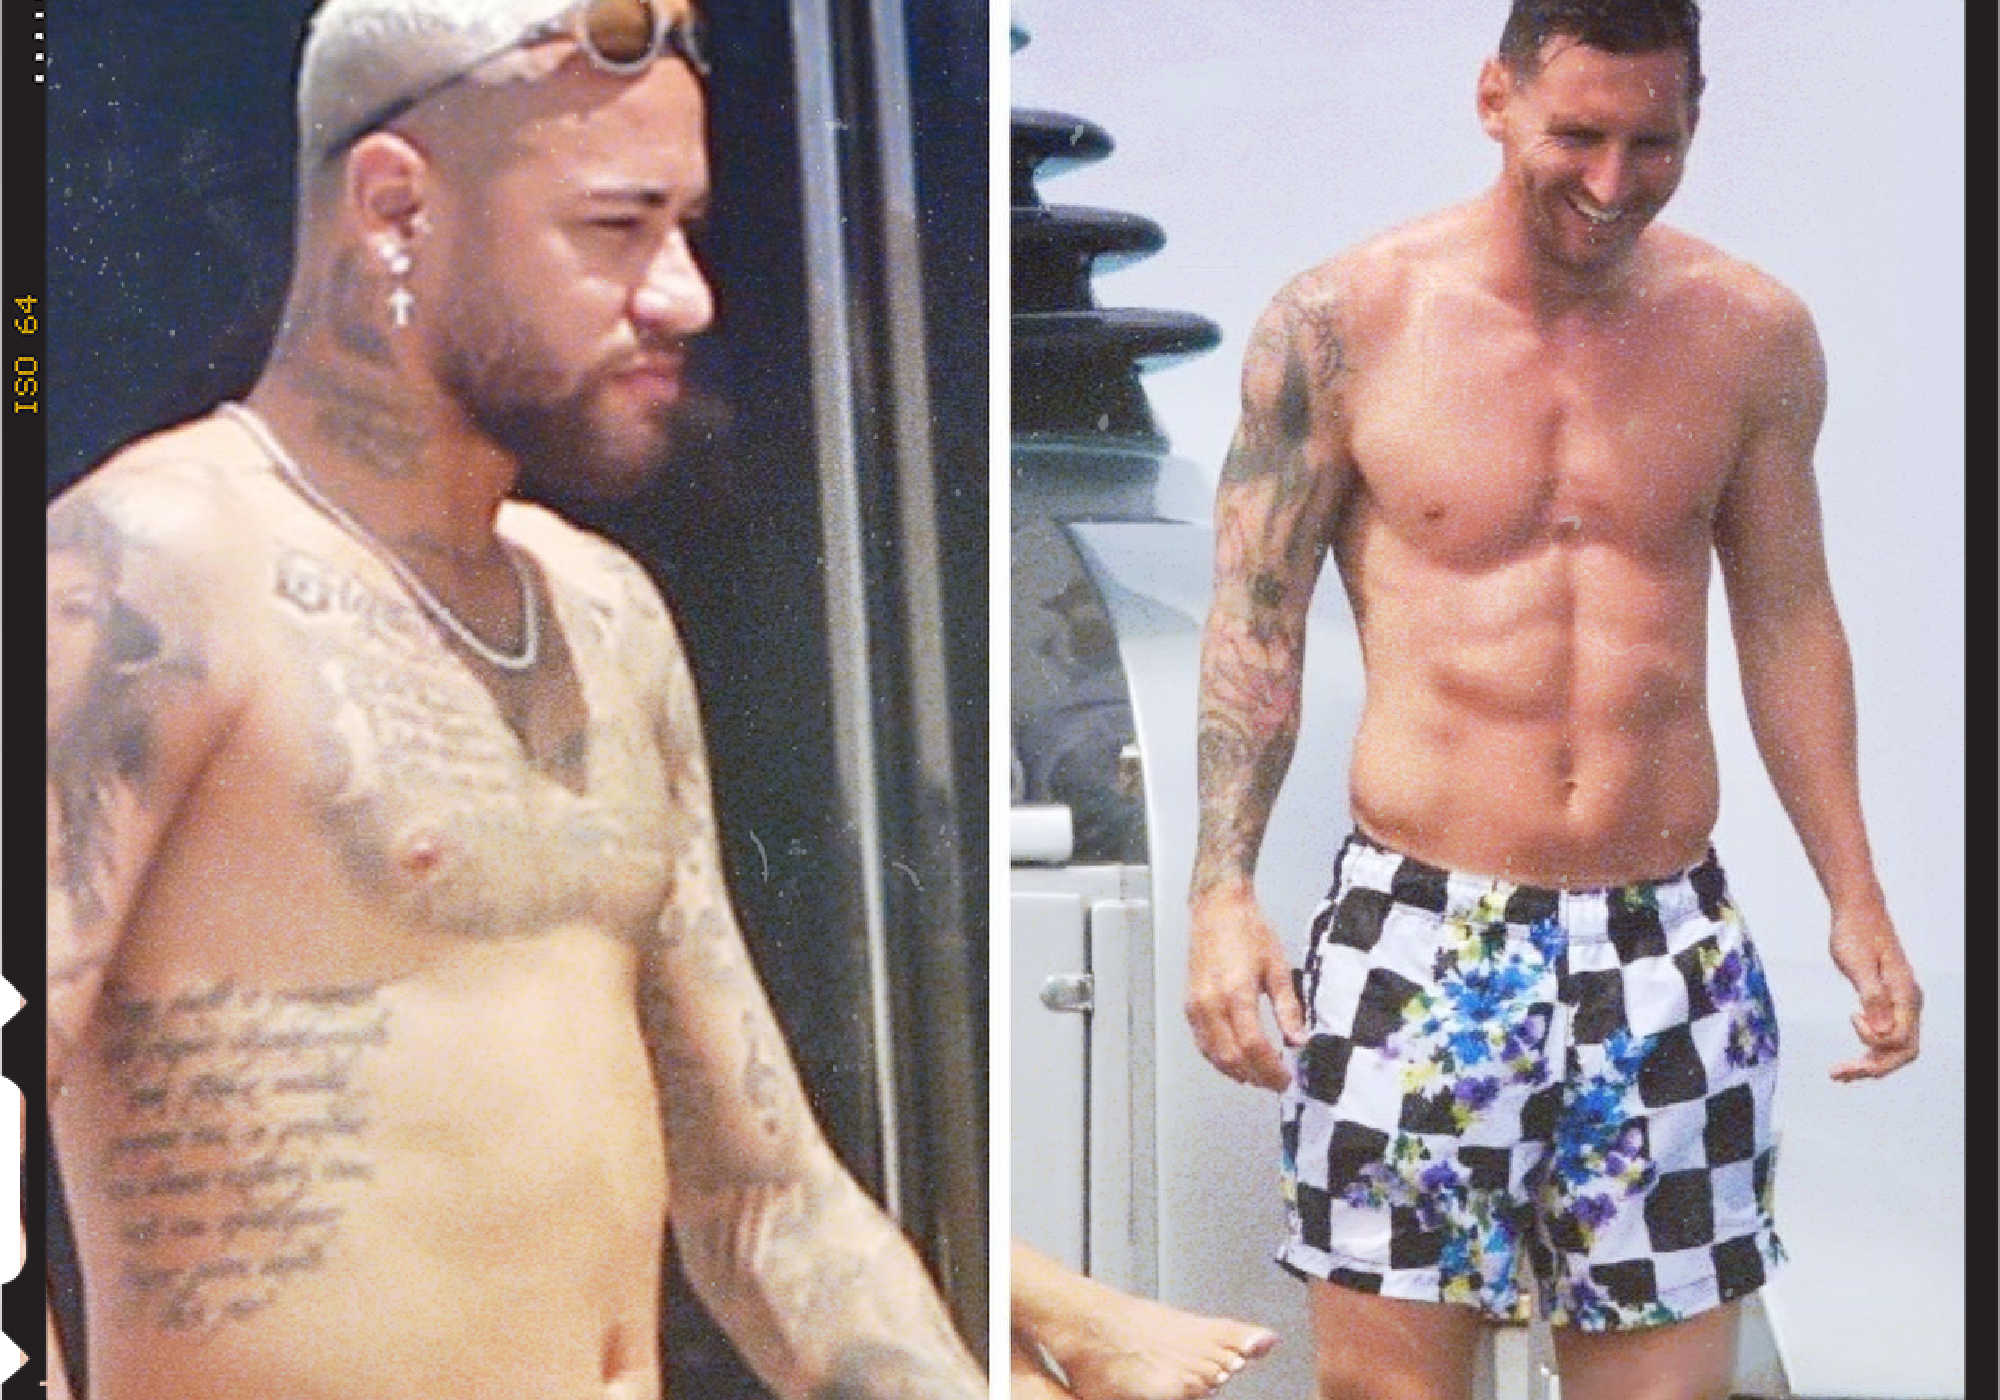 Lionel Messi shows ripped physique as opposed to Neymar’s dad bod